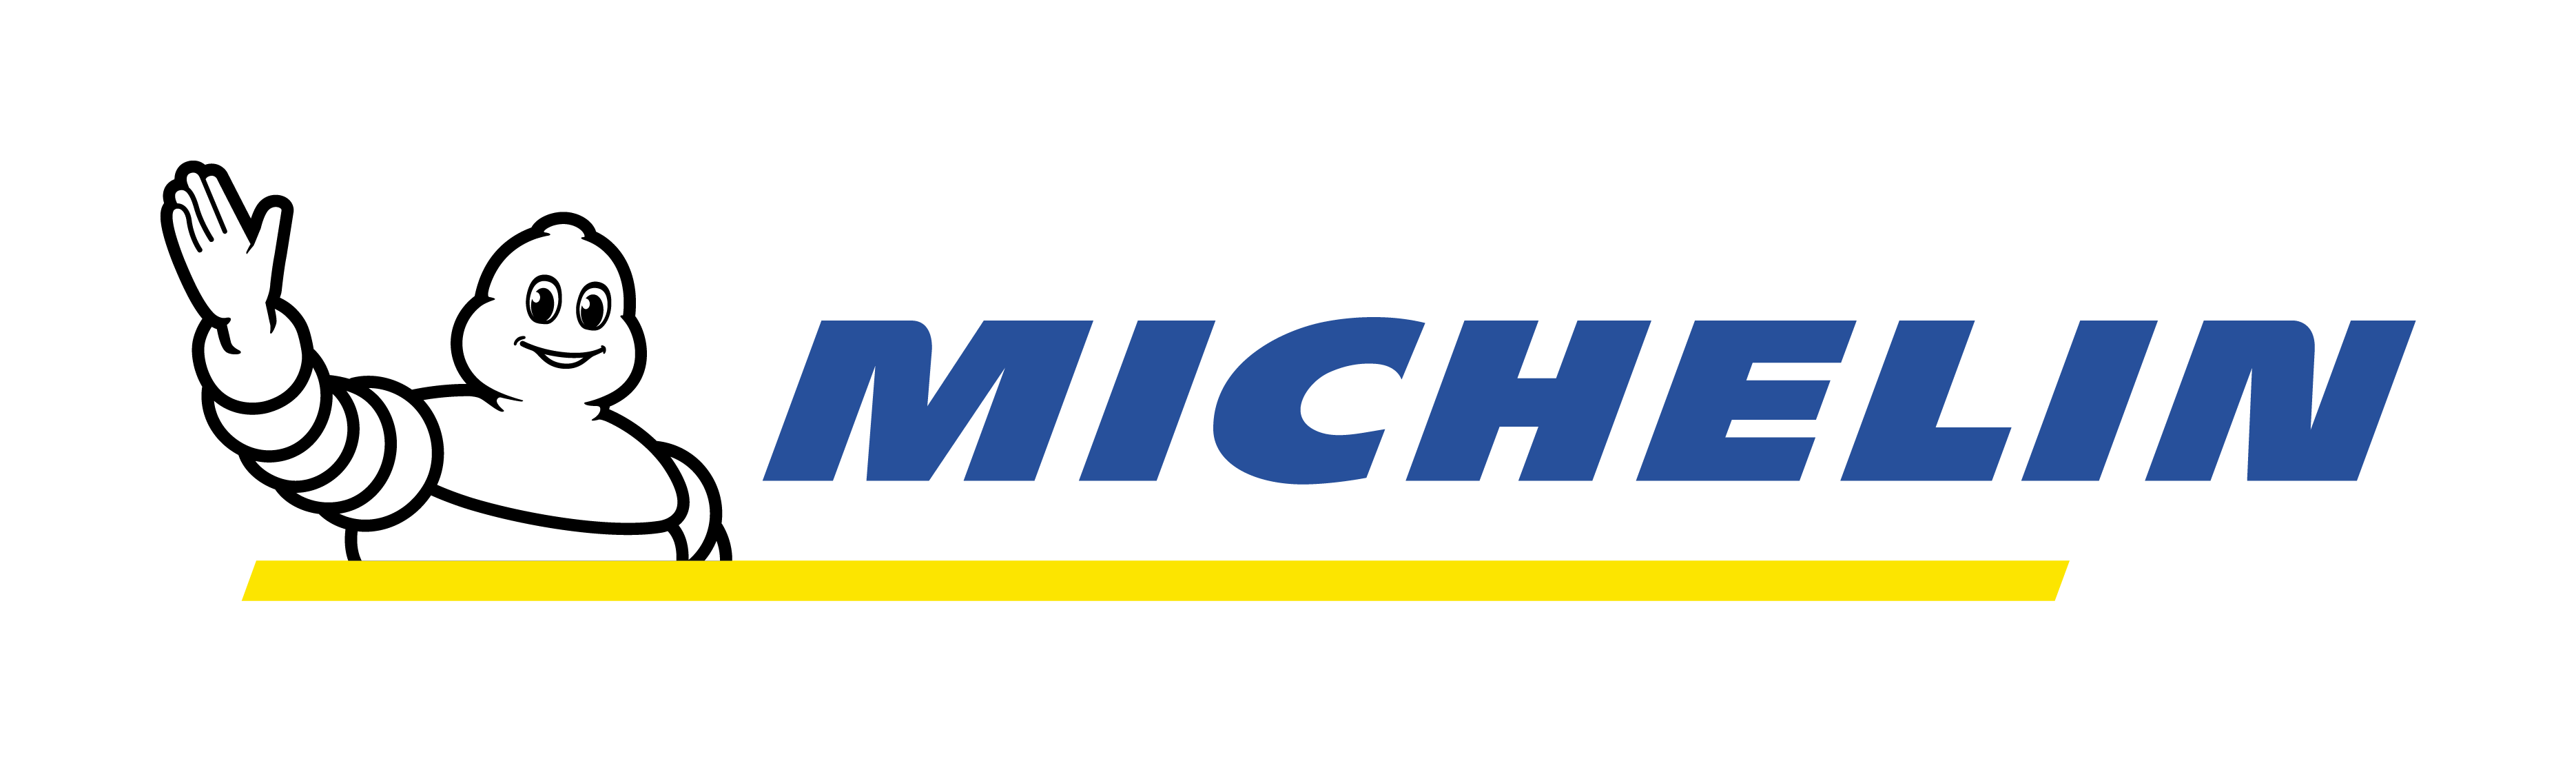 Michelin Tires Logo Vector Png Hdpng.com 3739 - Michelin Tires Vector, Transparent background PNG HD thumbnail